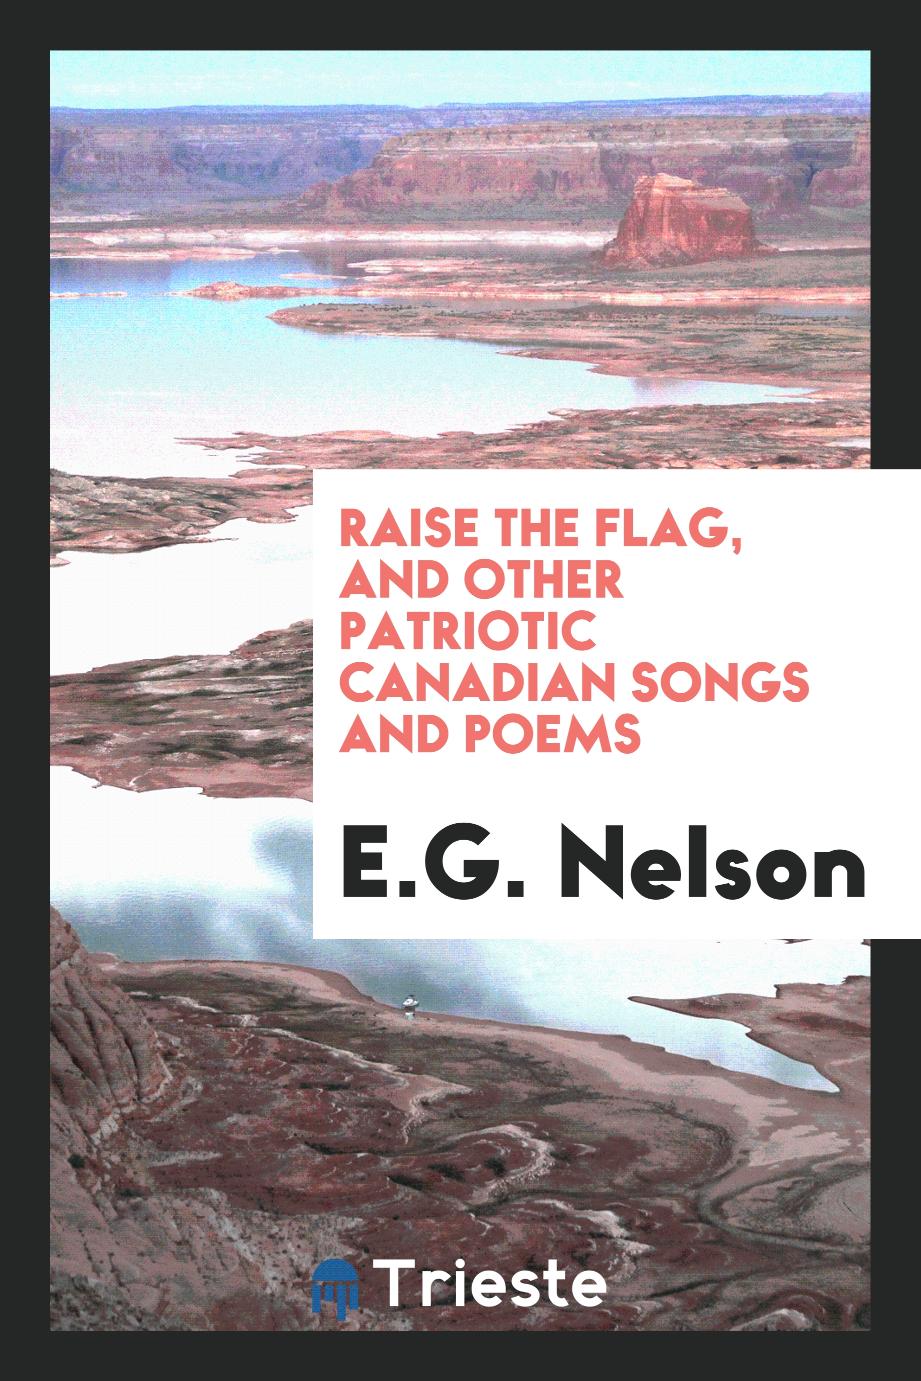 Raise the flag, and other patriotic Canadian songs and poems